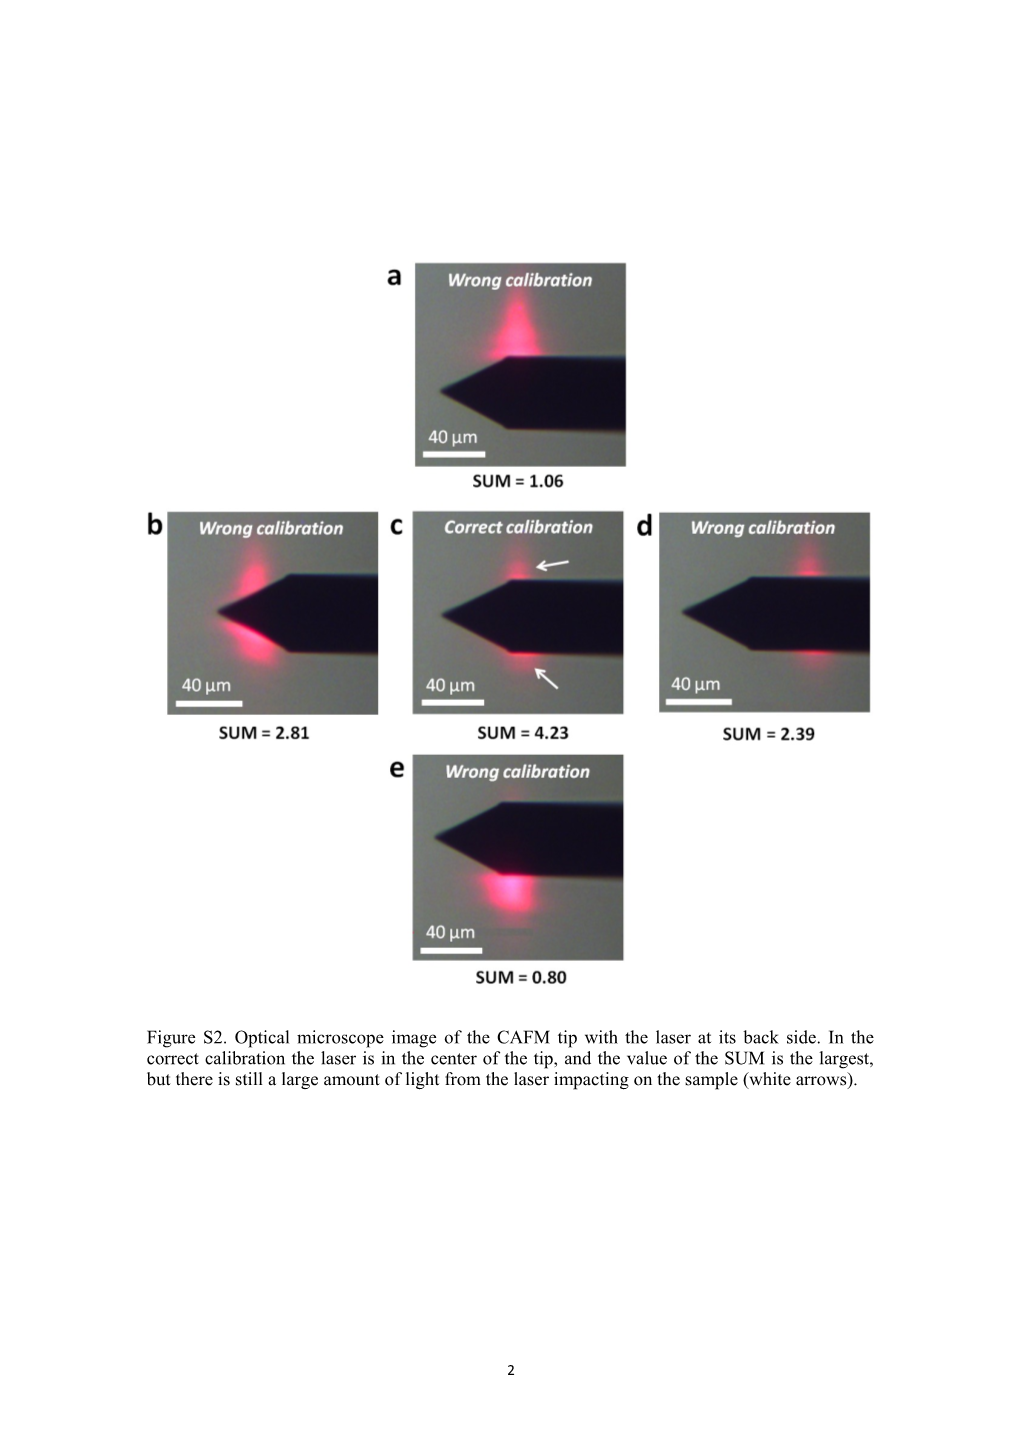 Characterization of the Photocurrents Generated by the Laser of Atomic Force Microscopes